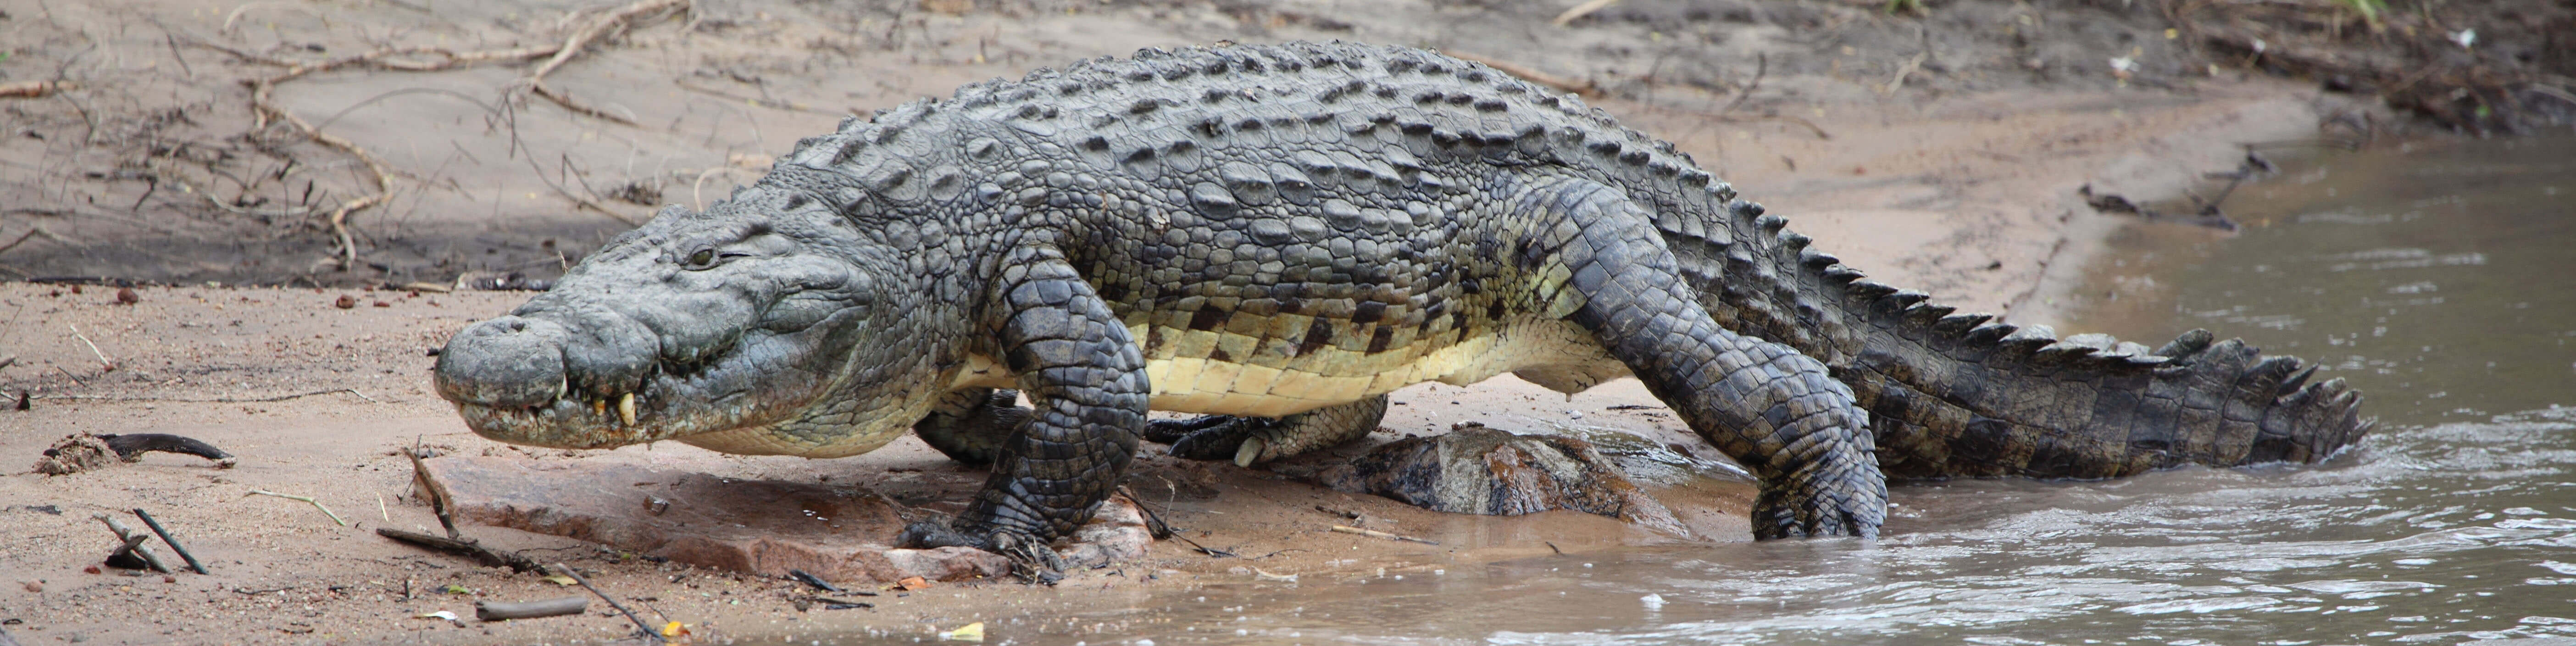 Nile crocodile, one of the dangerous seven game animals